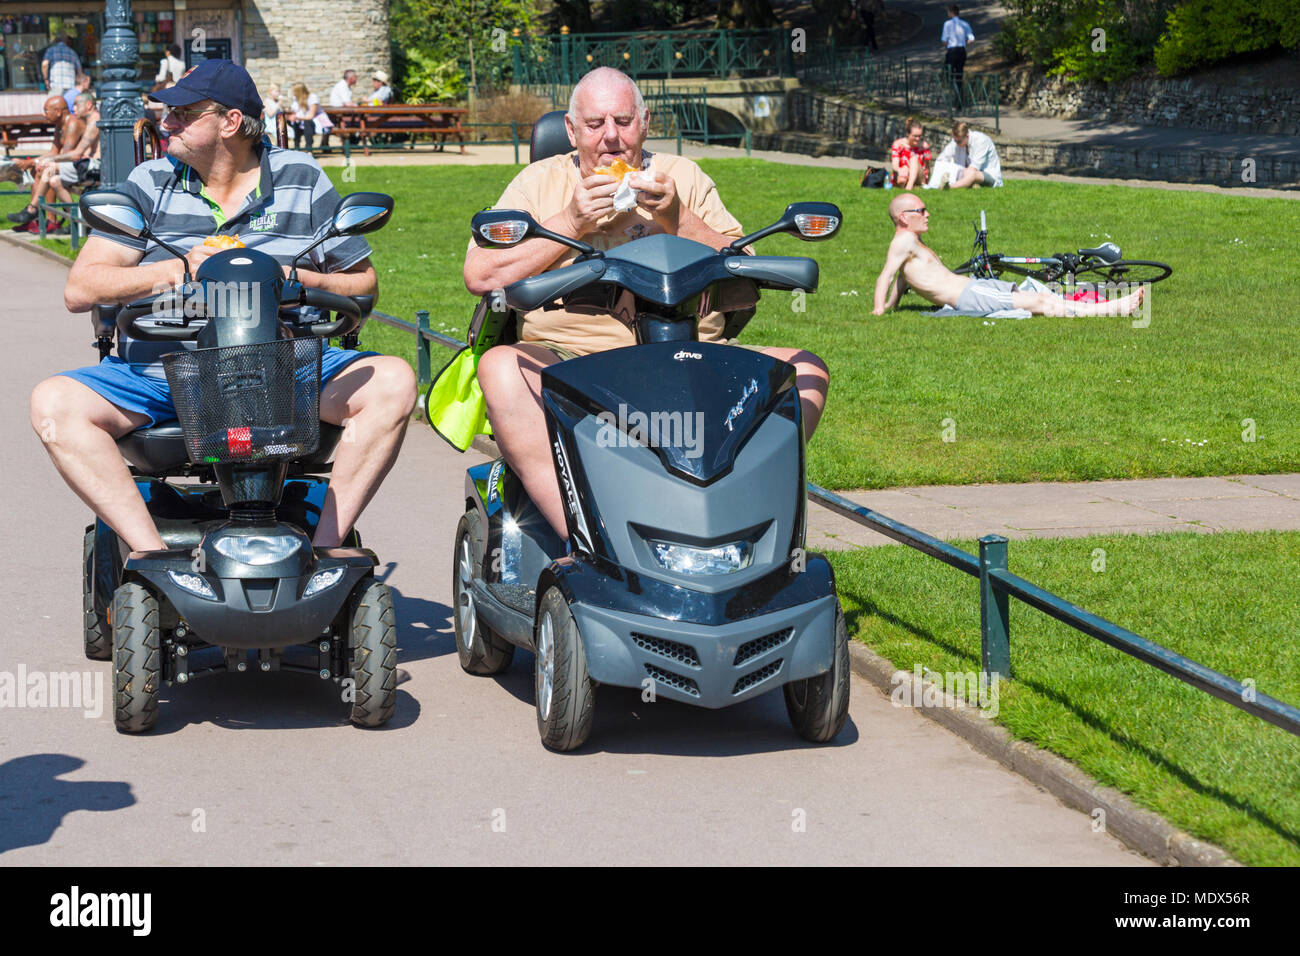 Bournemouth, Dorset, UK. 20th April 2018. UK weather: pensioners on mobility scooters enjoying their lunch in Bournemouth Gardens on a hot sunny day. Credit: Carolyn Jenkins/Alamy Live News Stock Photo